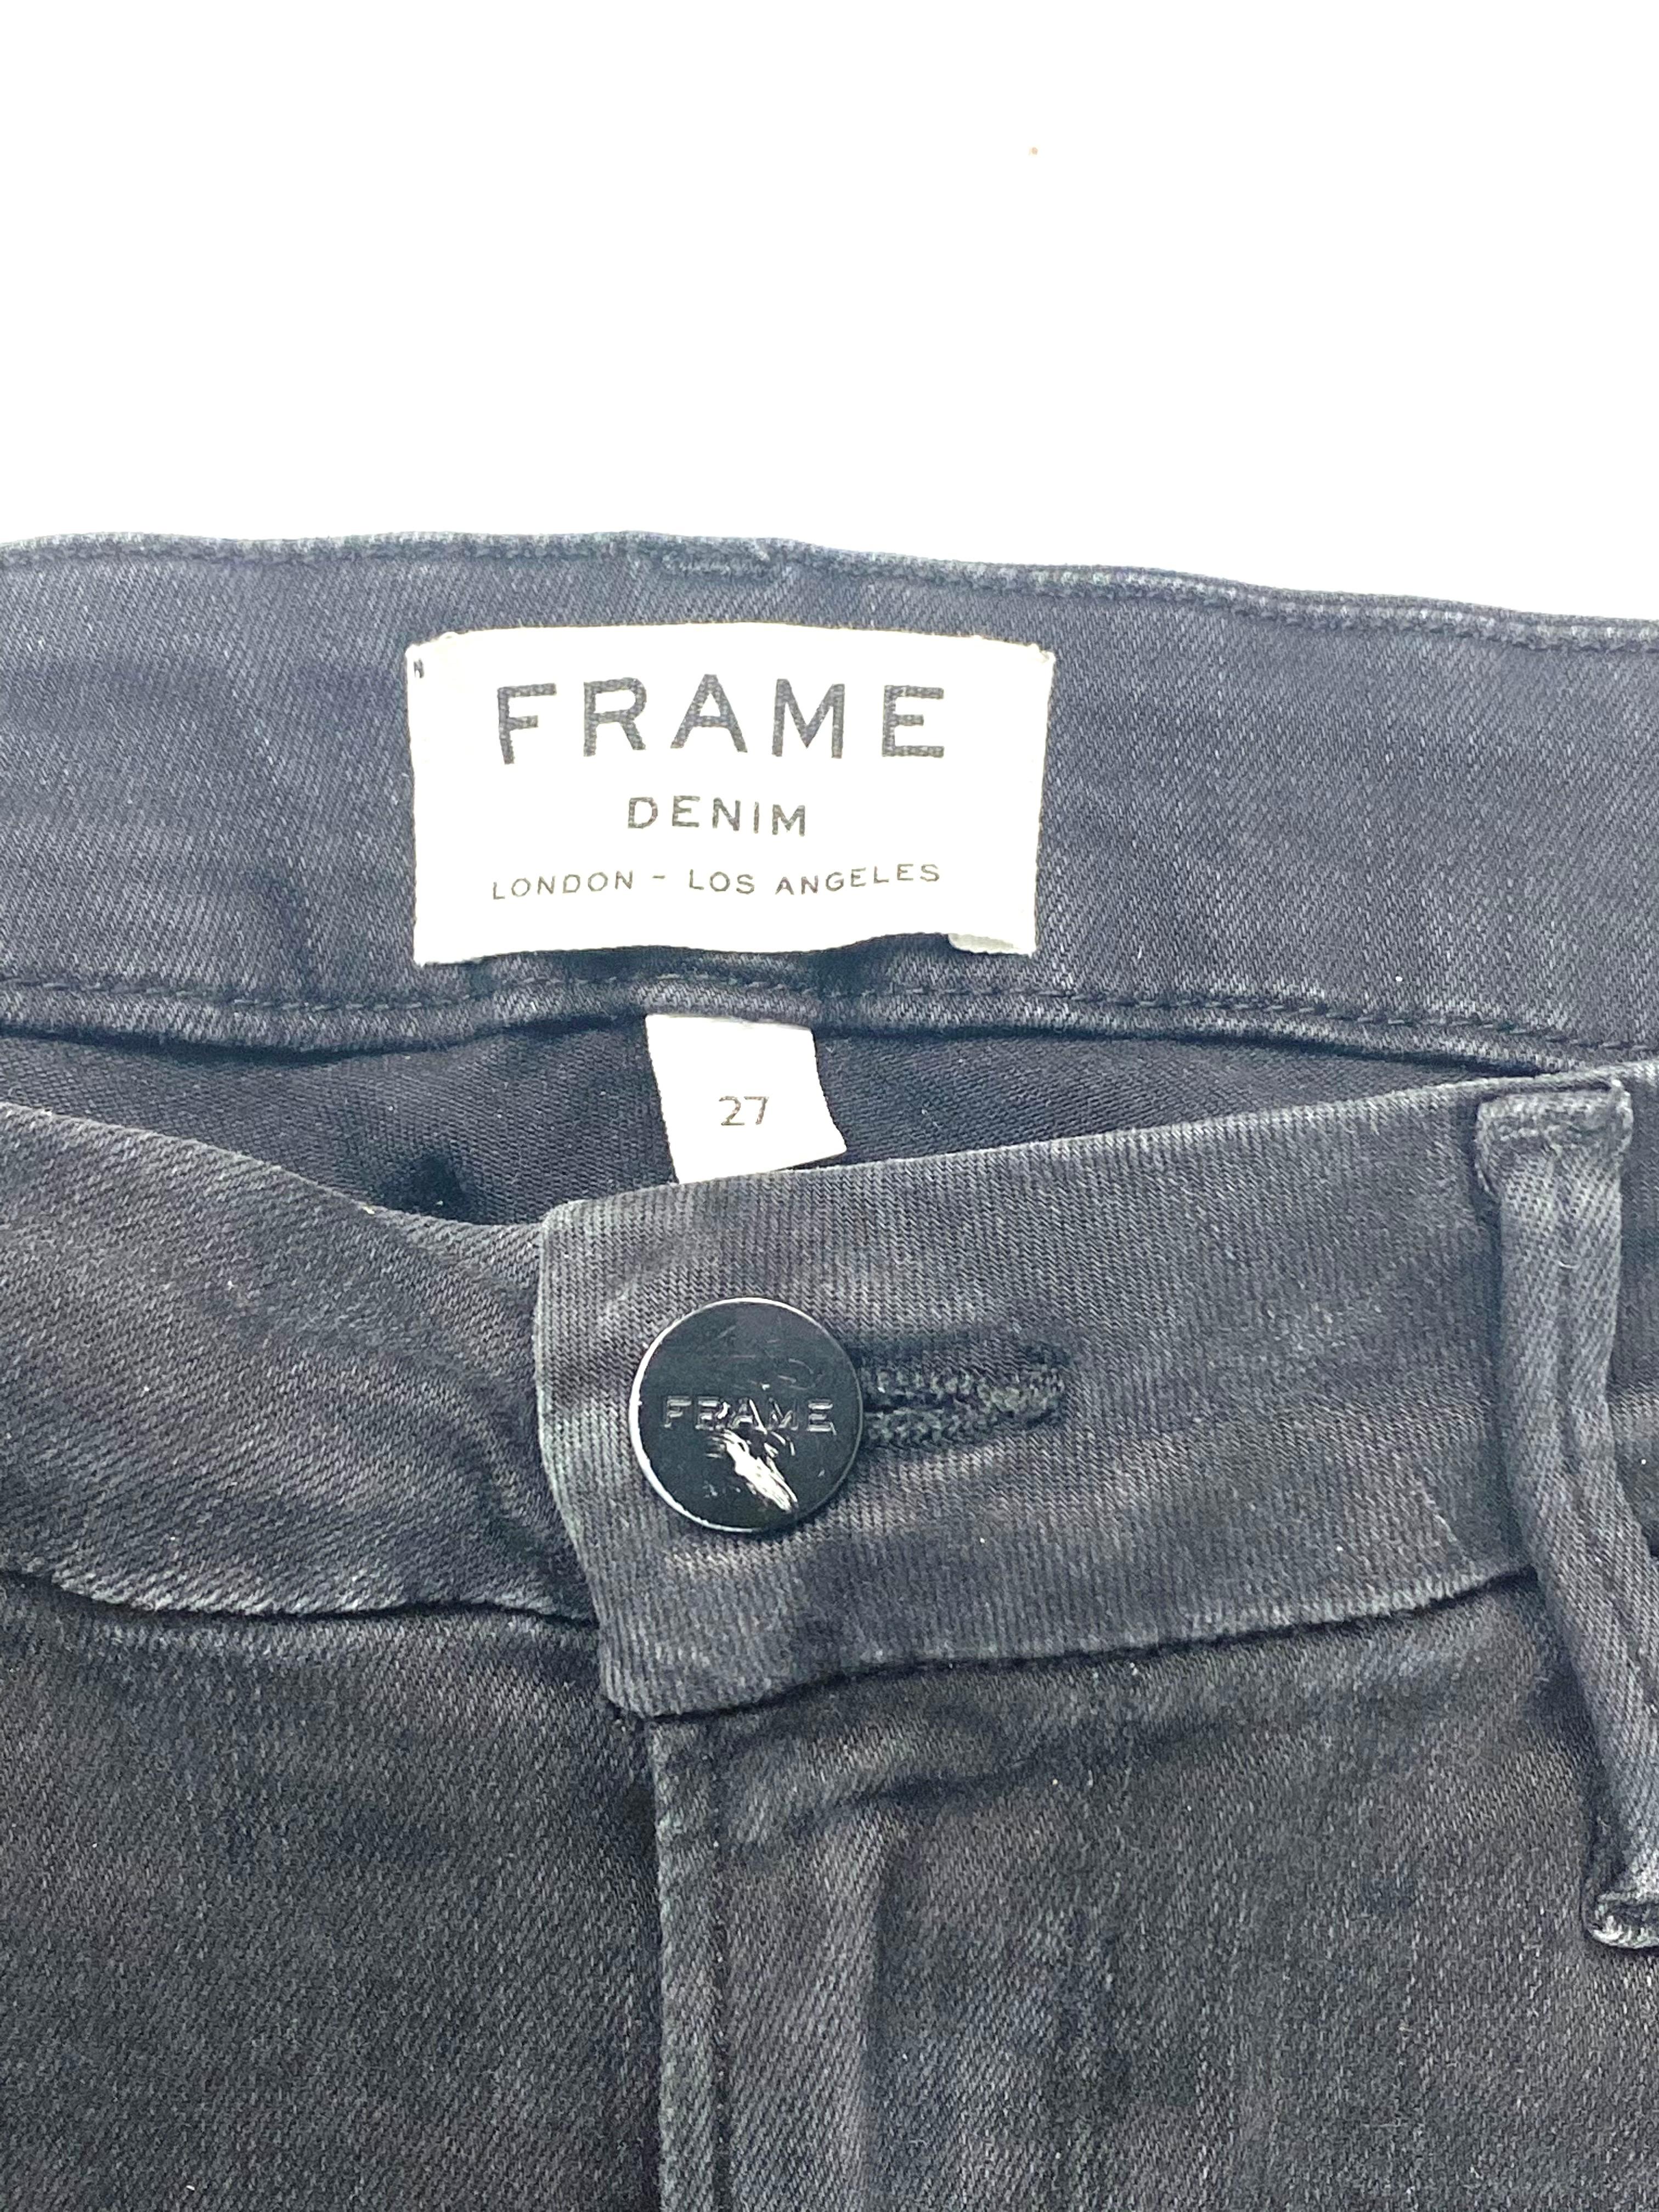 Frame Le Crop Mini Boot Black Denim Jeans, Size 27 In Good Condition For Sale In Beverly Hills, CA